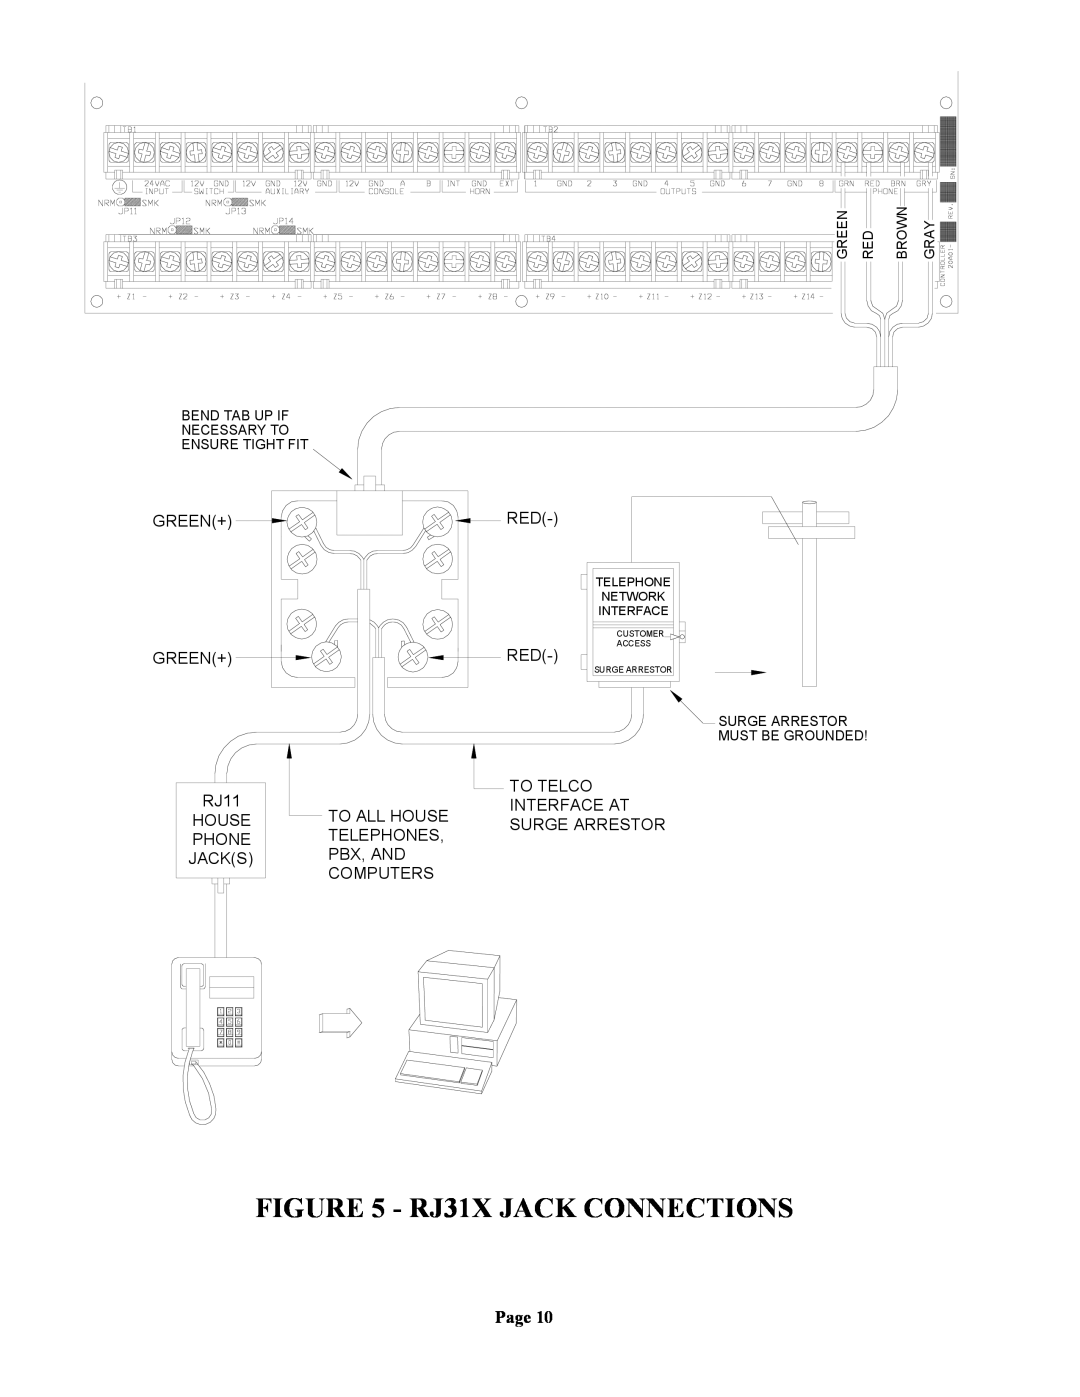 Home Automation 20A00-1 installation manual RJ31X JACK CONNECTIONS, Page 